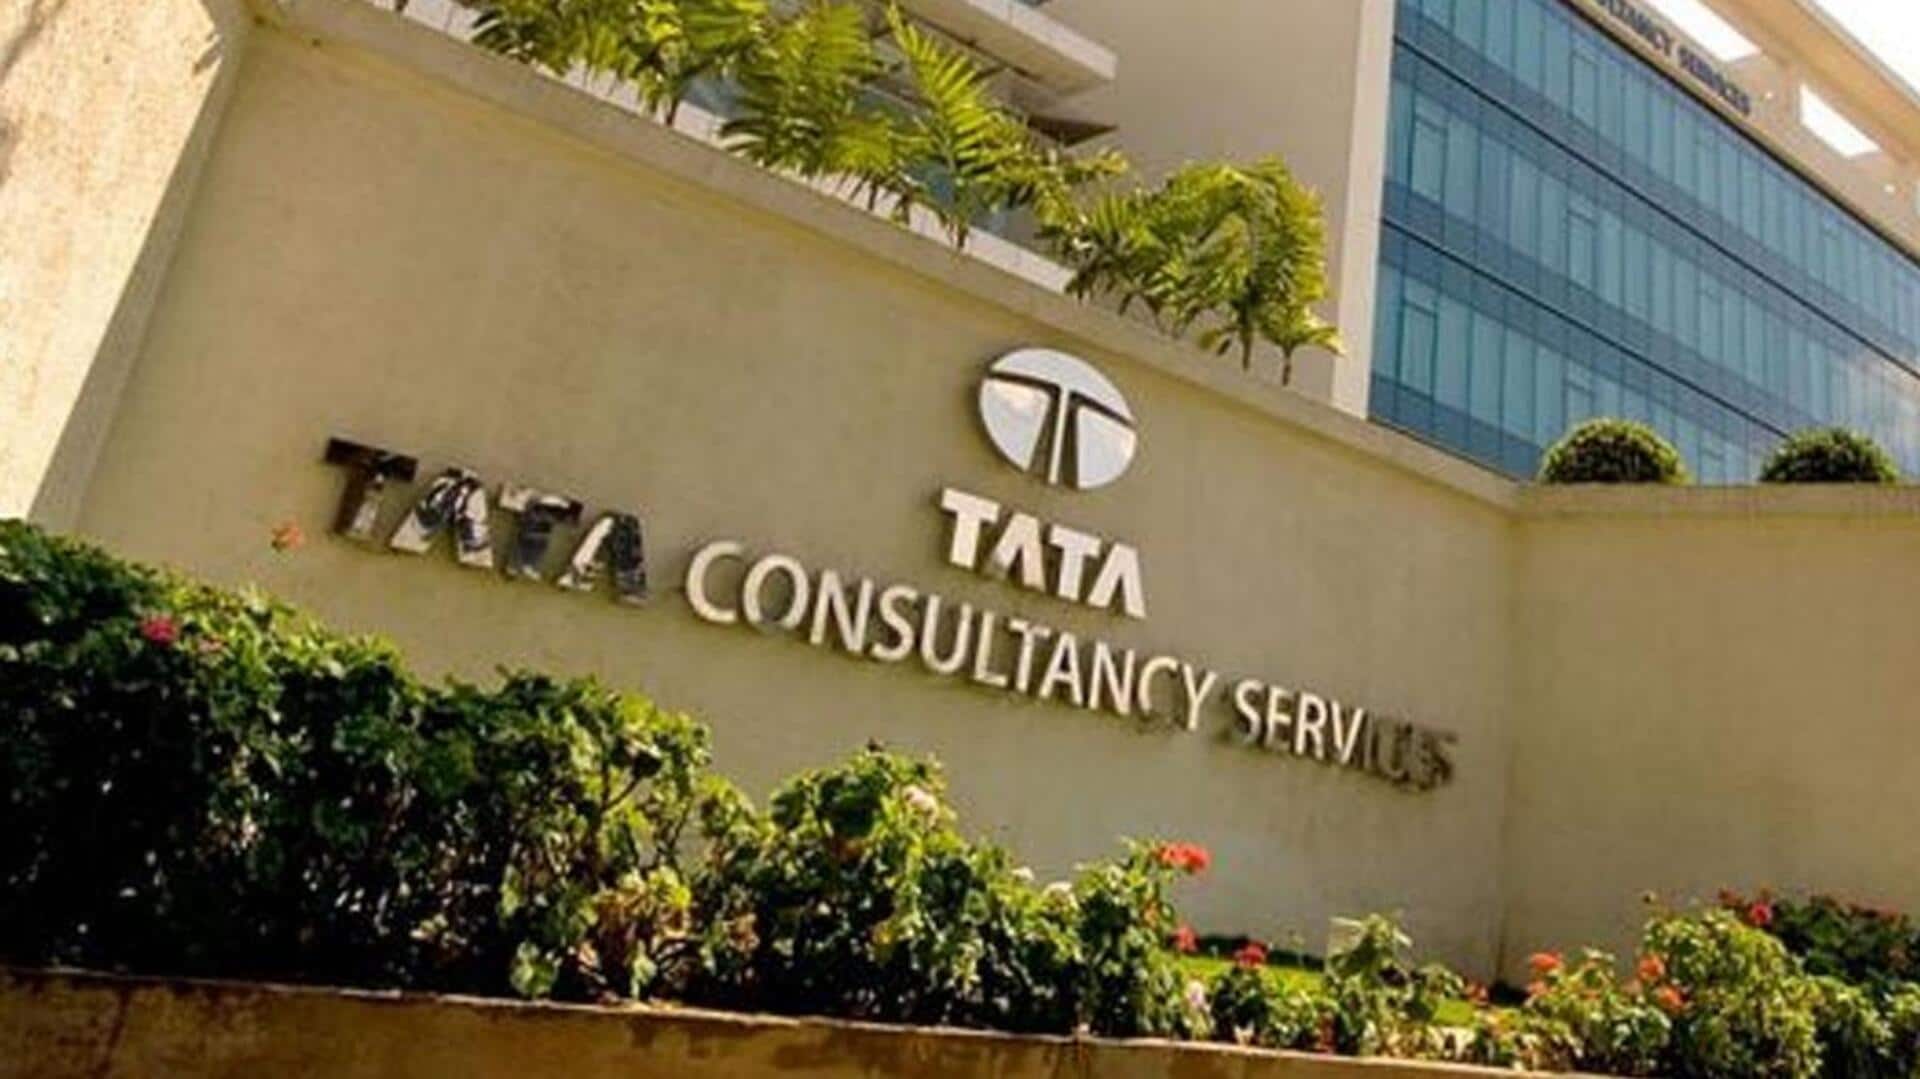 TCS announces Rs. 17,000 crore share buyback at 15% premium